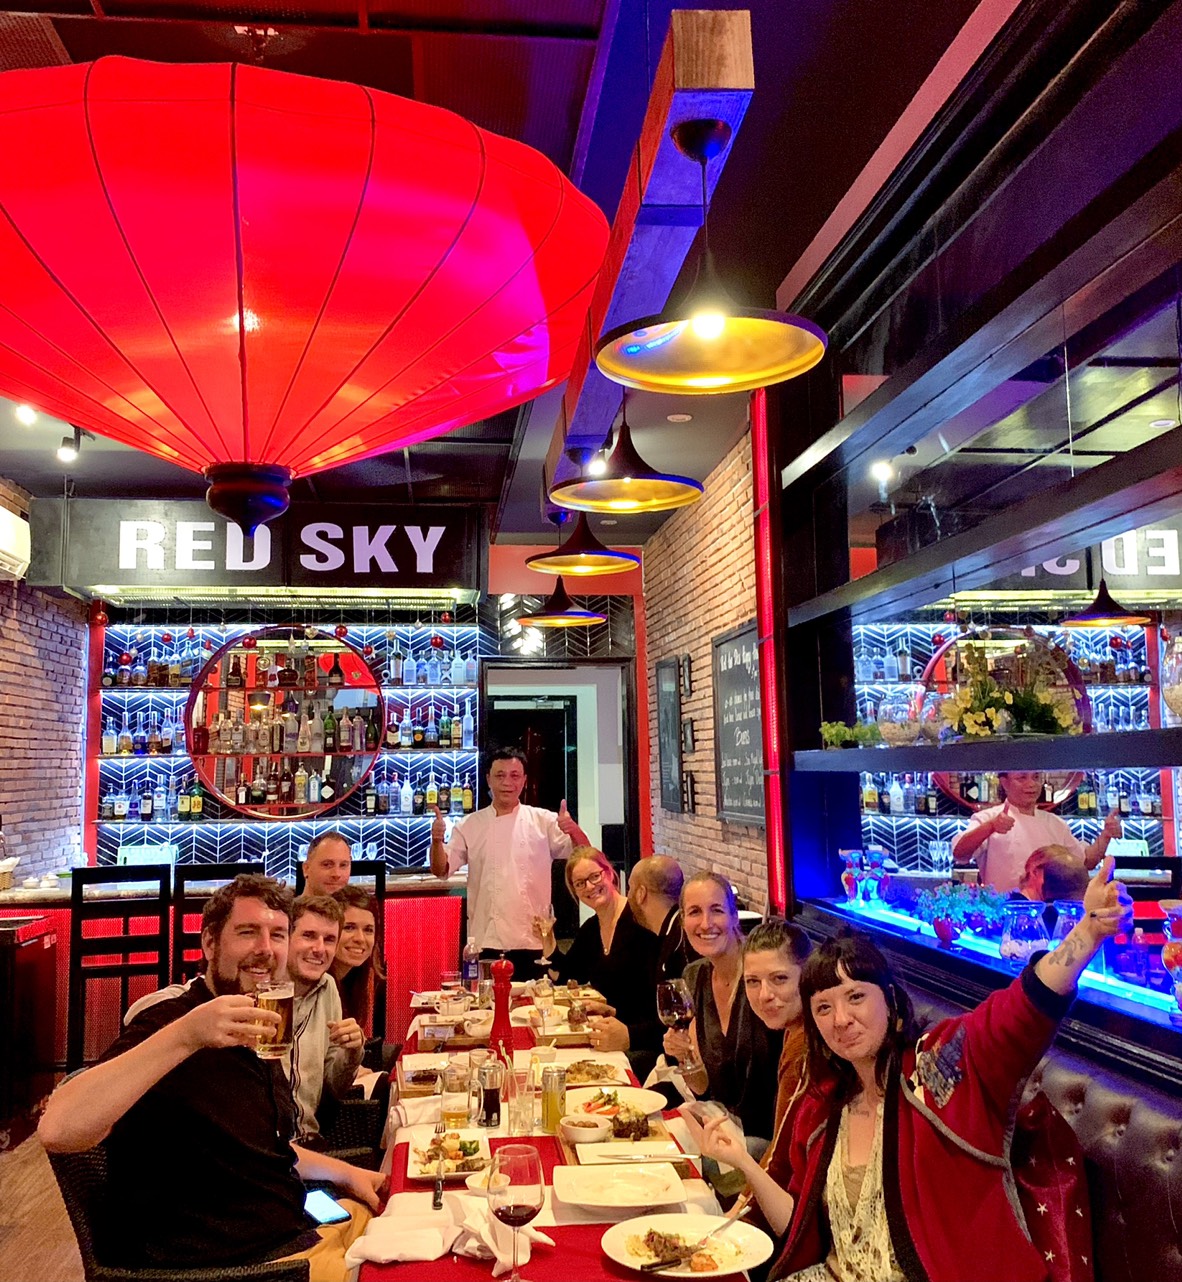 Red Sky Steakhouse is a classy place among the best restaurants in Da Nang